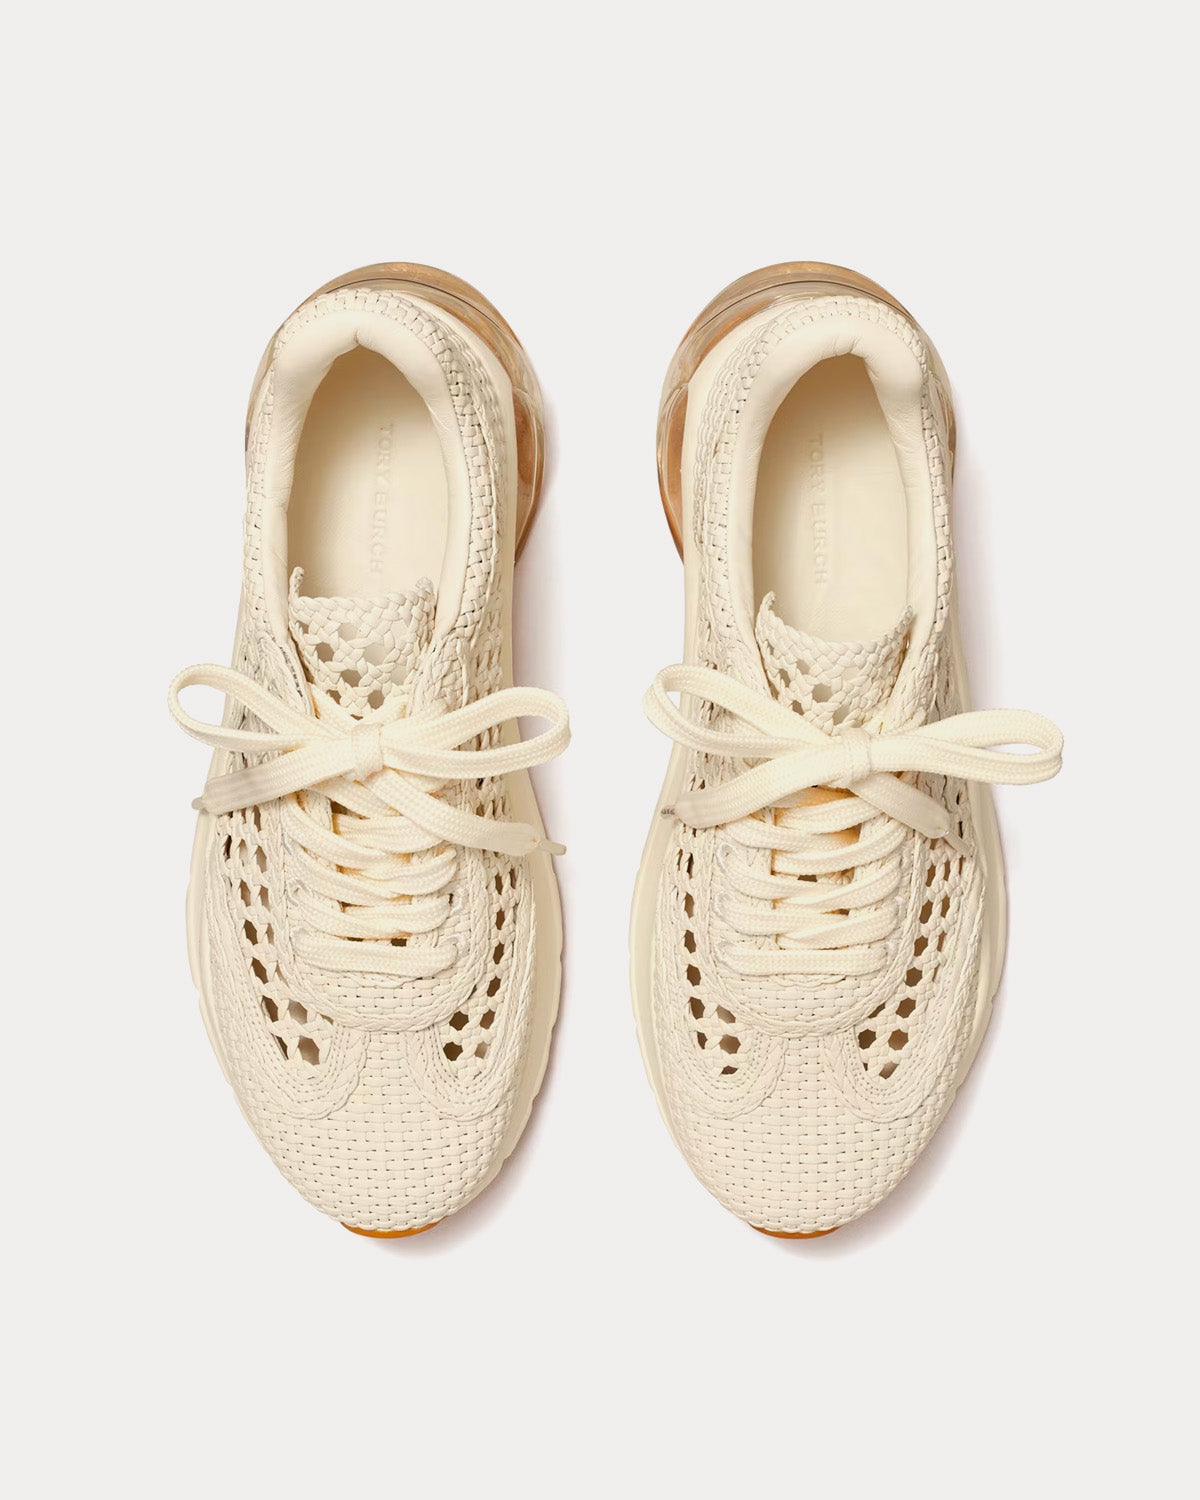 Tory Burch - Good Luck Woven Natural Low Top Sneakers